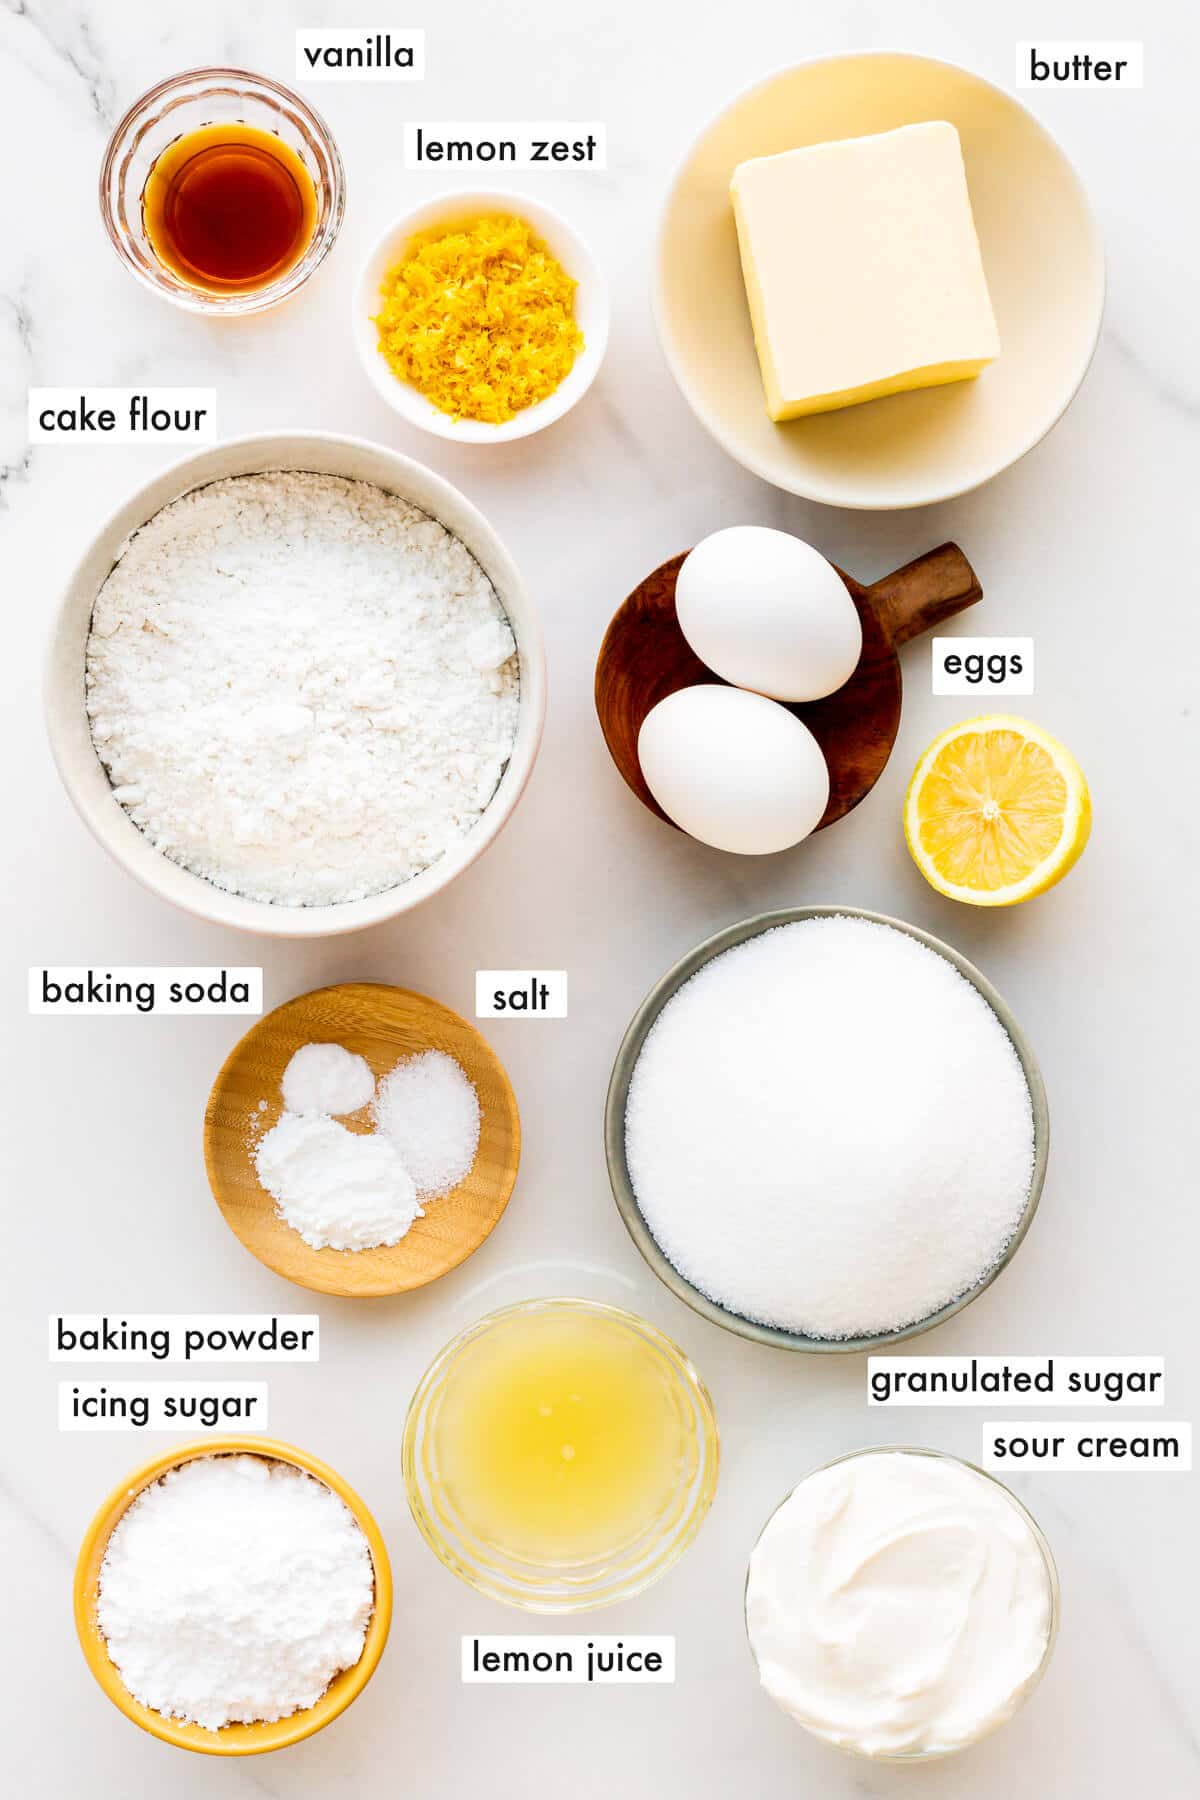 Ingredients to make lemon loaf cake from scratch measured out and ready to mix.